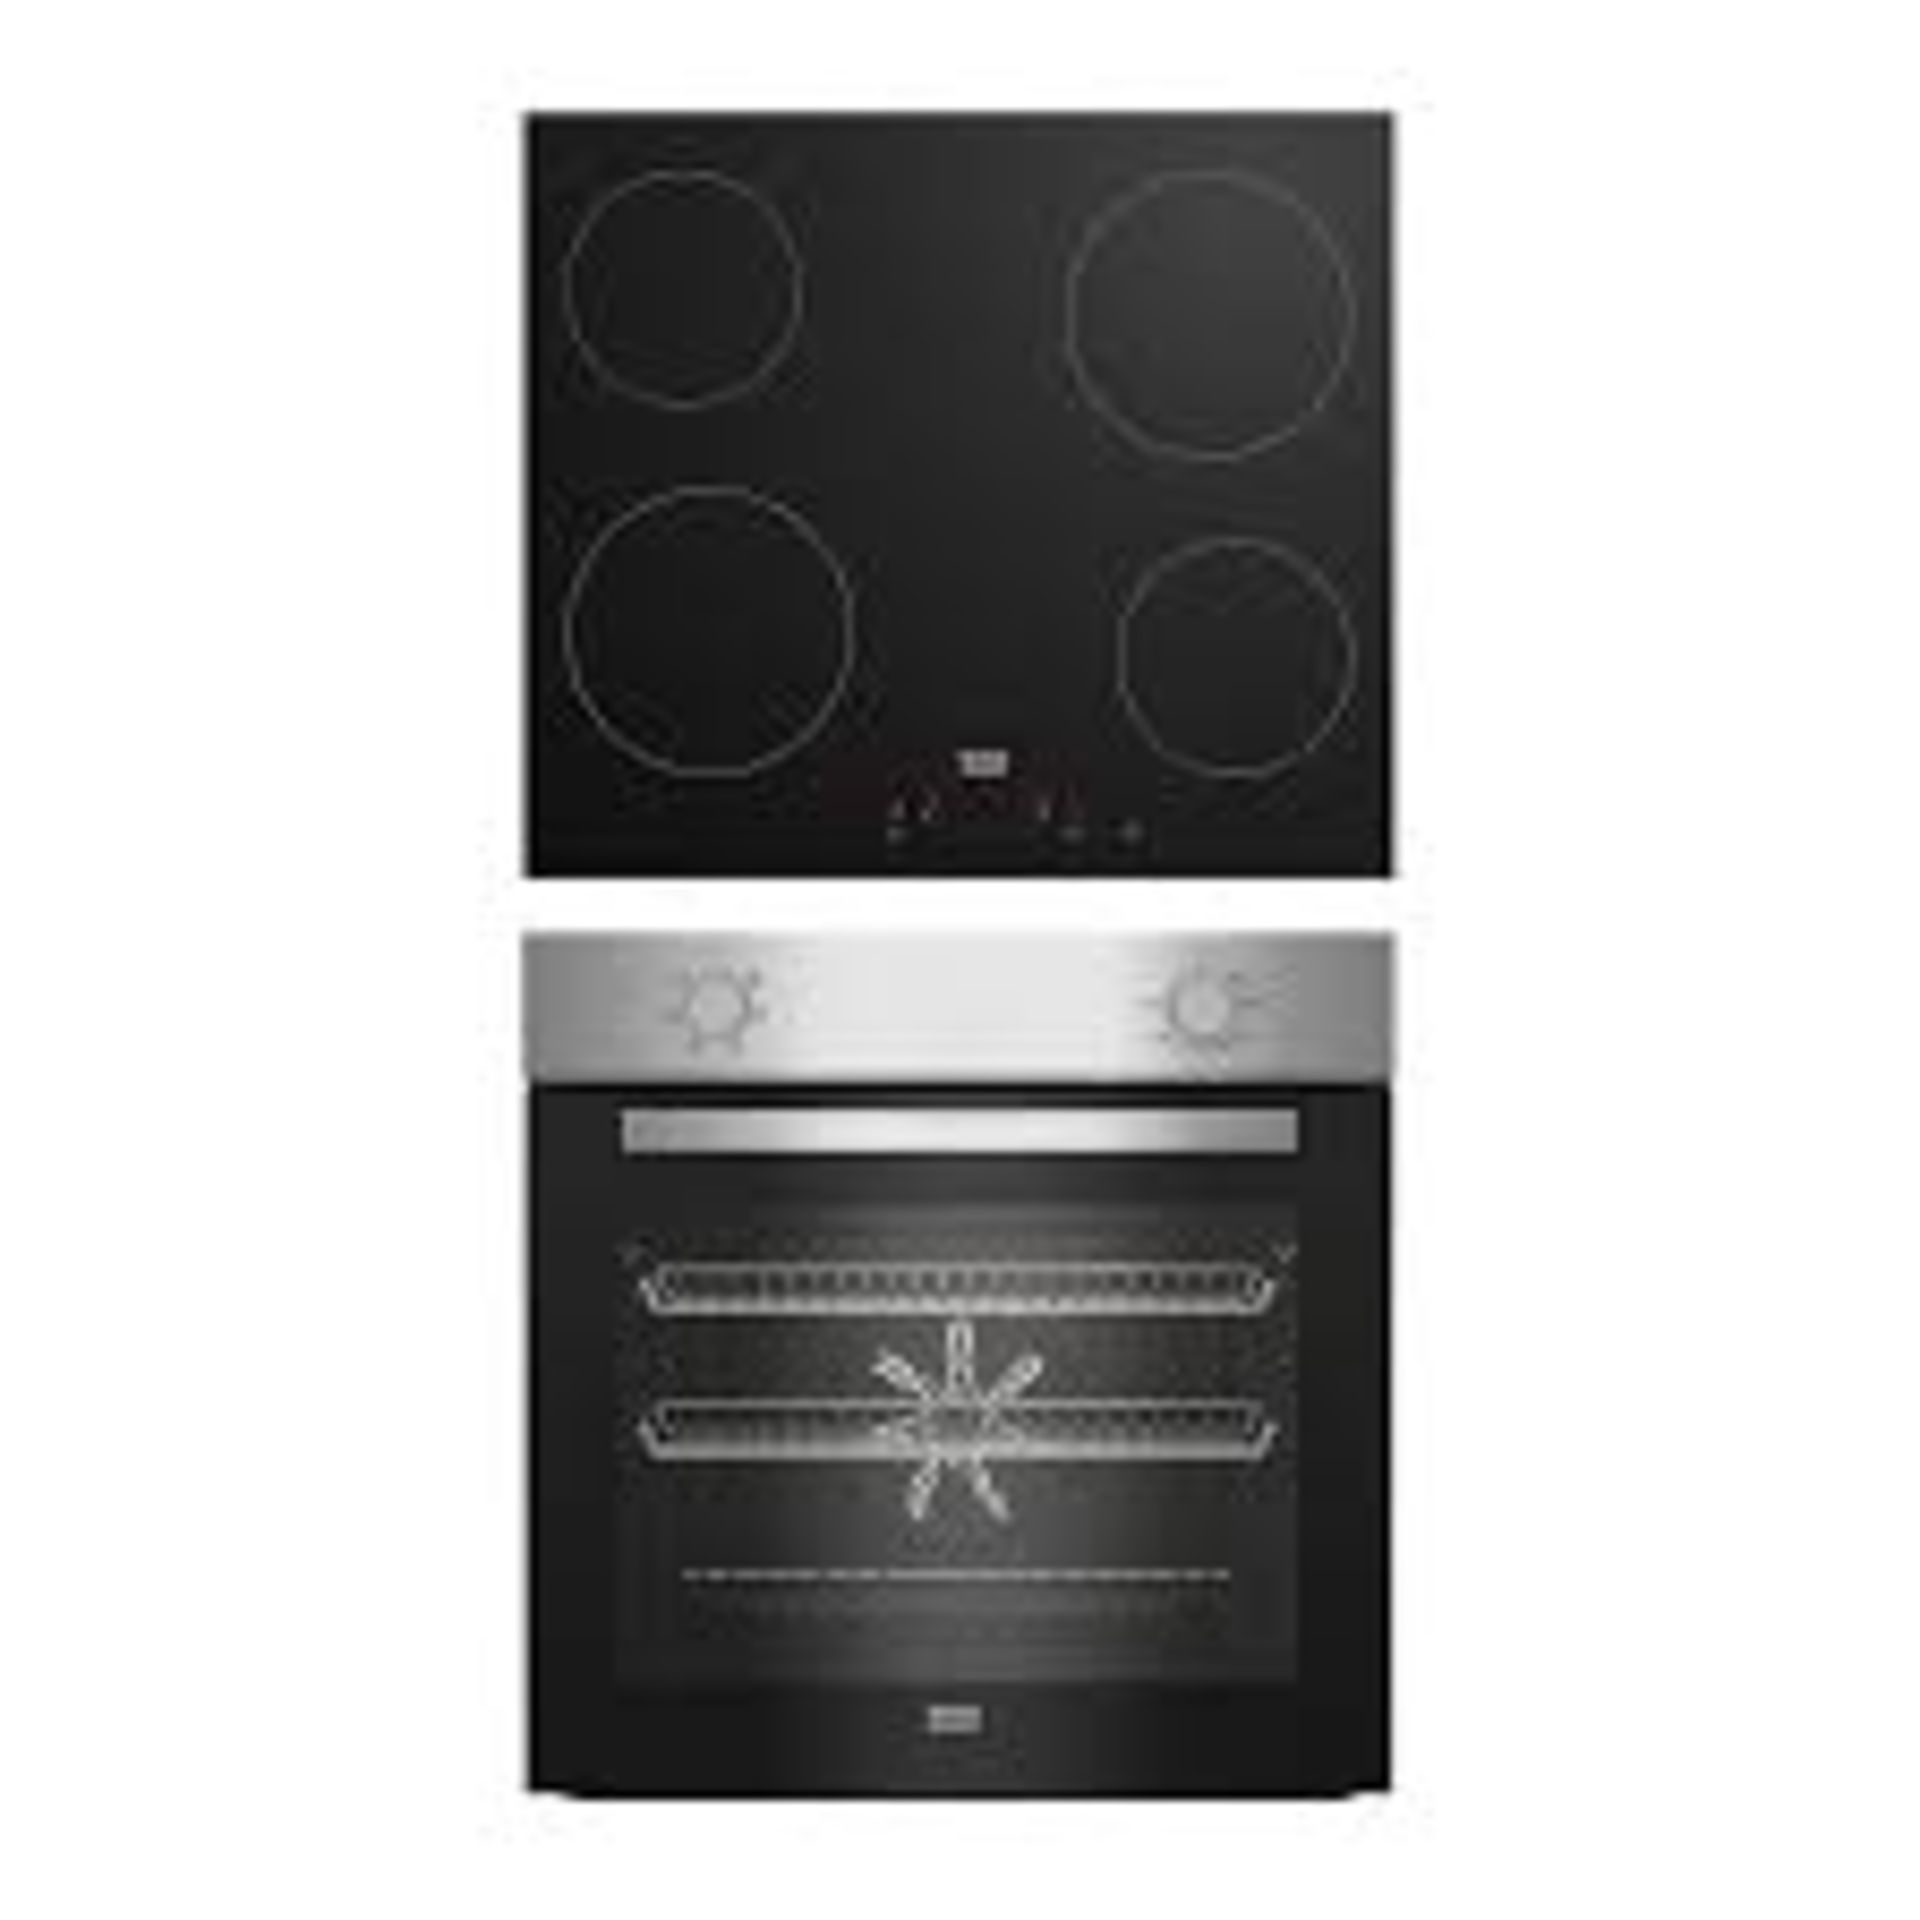 Beko QBSE222X Built-in Multifunction Oven & hob pack. - R9BW. Bake perfect cupcakes, roast a